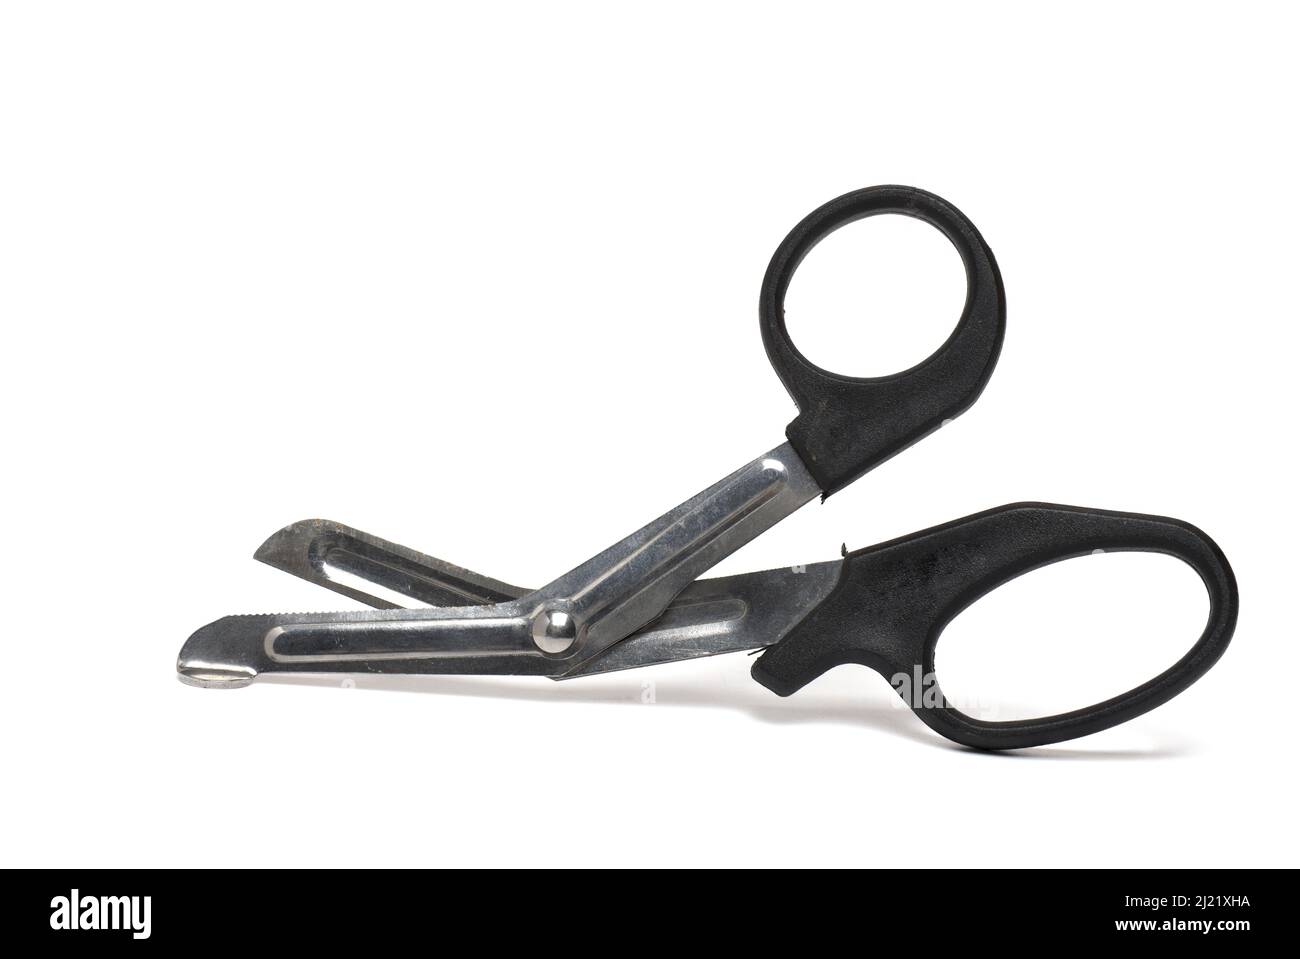 Close up of slightly opened blunt metal bandage scissors with black handles for safe cutting of wound dressings when treating injuries on white backgr Stock Photo